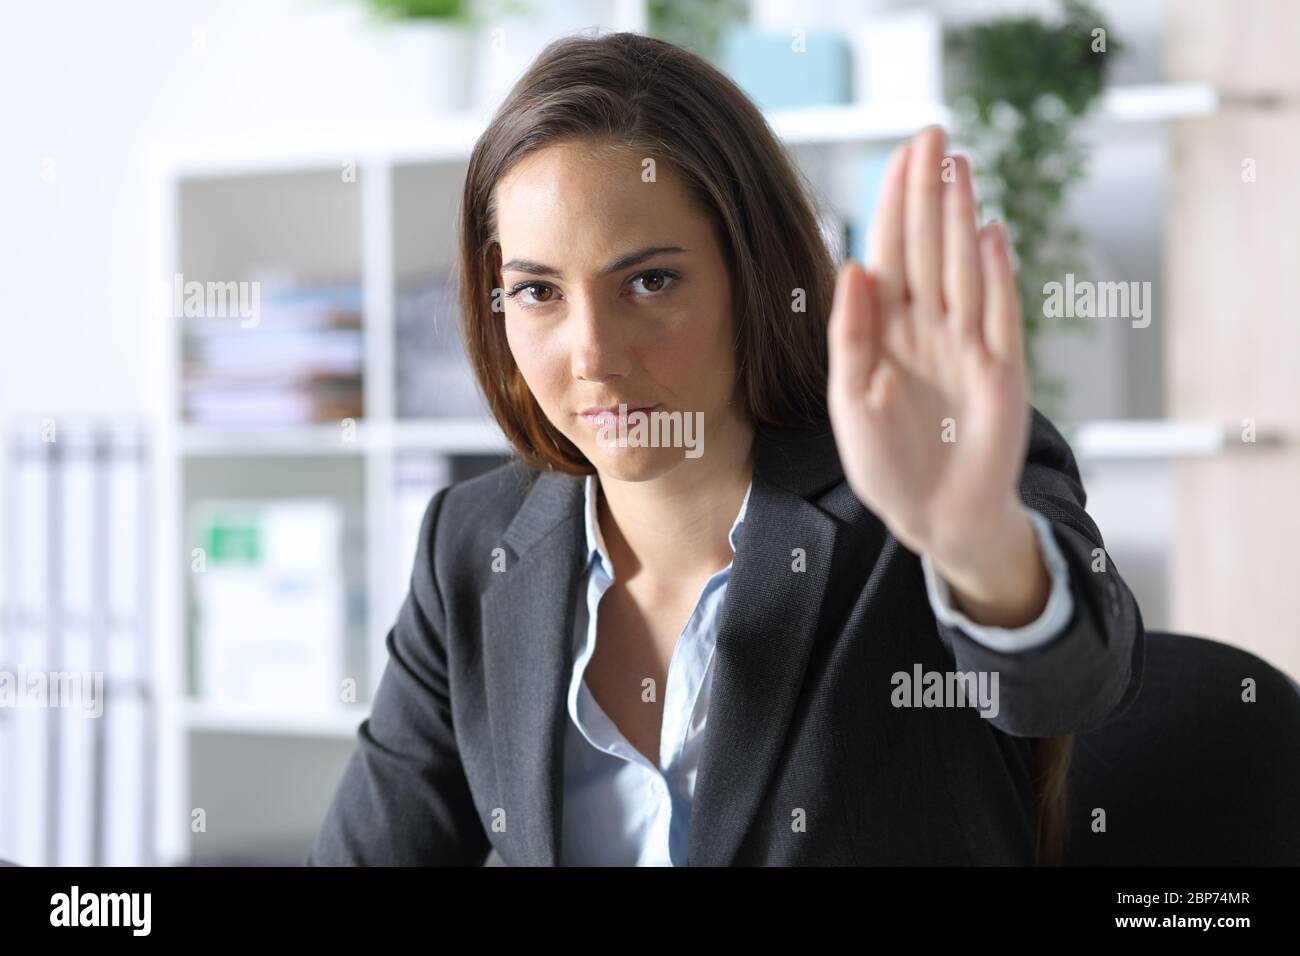 Serious executive woman looking at camera gesturing stop sitting at the office Stock Photo